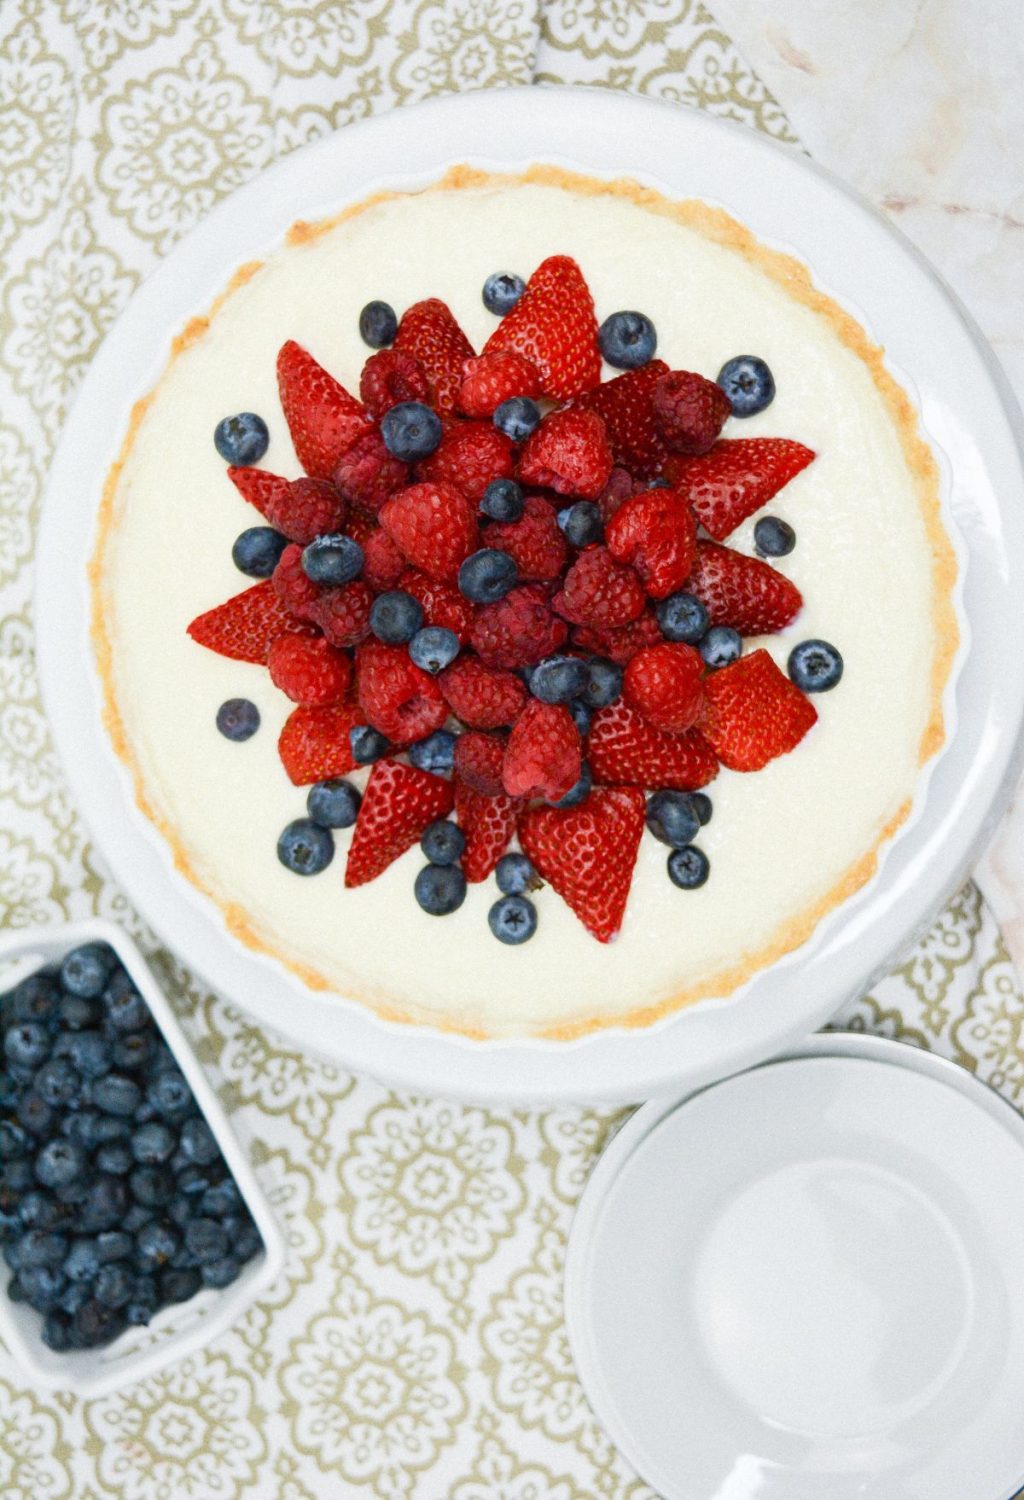 A white plate with a blueberry and strawberry tart on it.